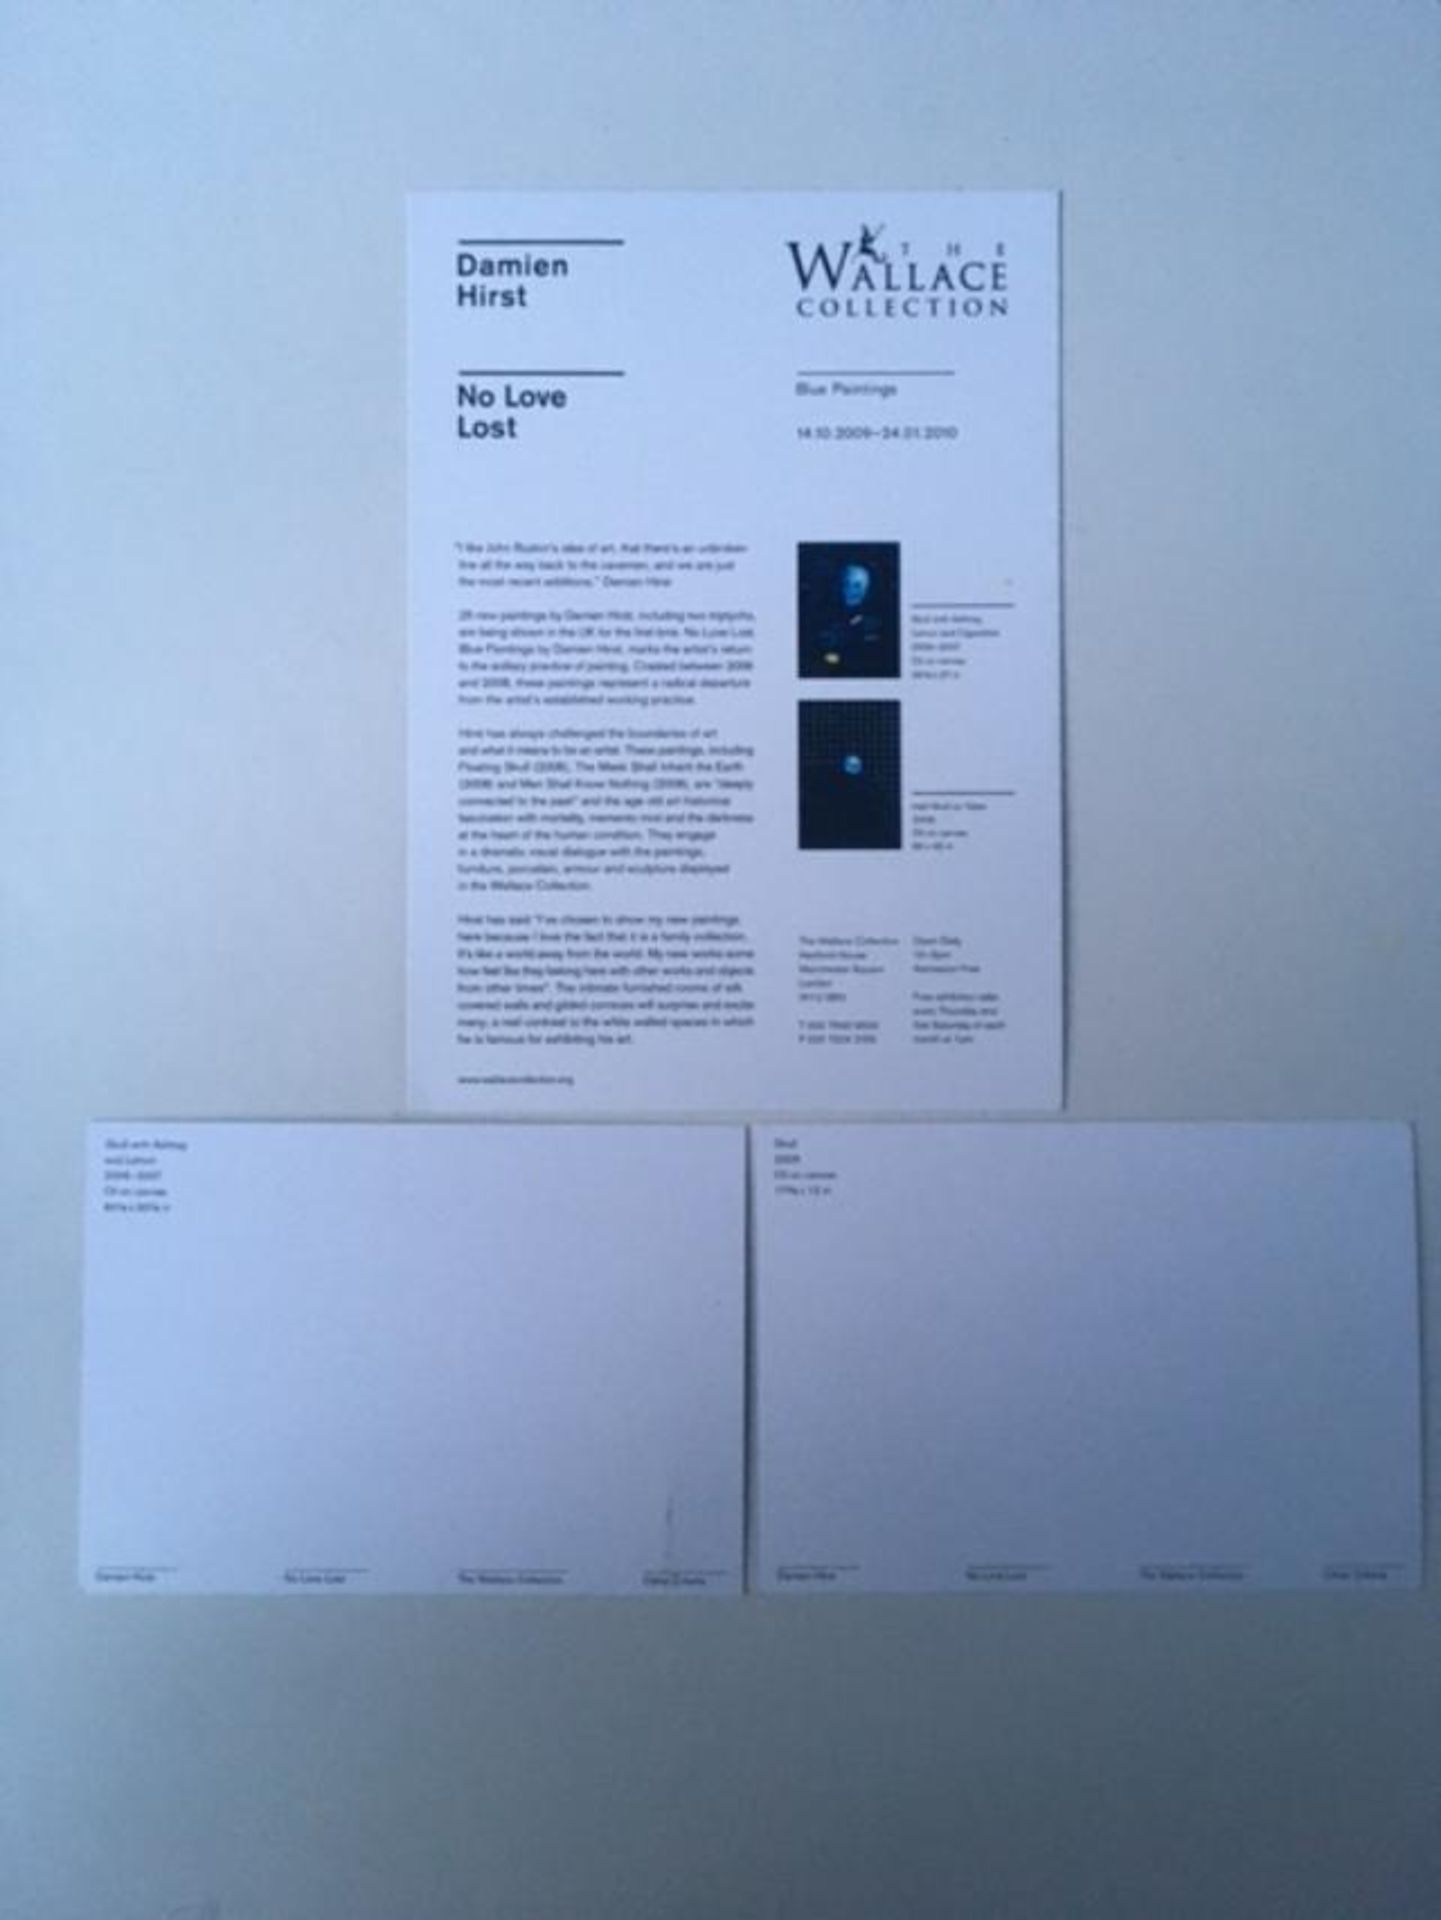 Damian Hurst (b 1965) ‘No Love Lost’ Three Exhibition Cards from ‘Blue Paintings’, 2009 - Image 2 of 5